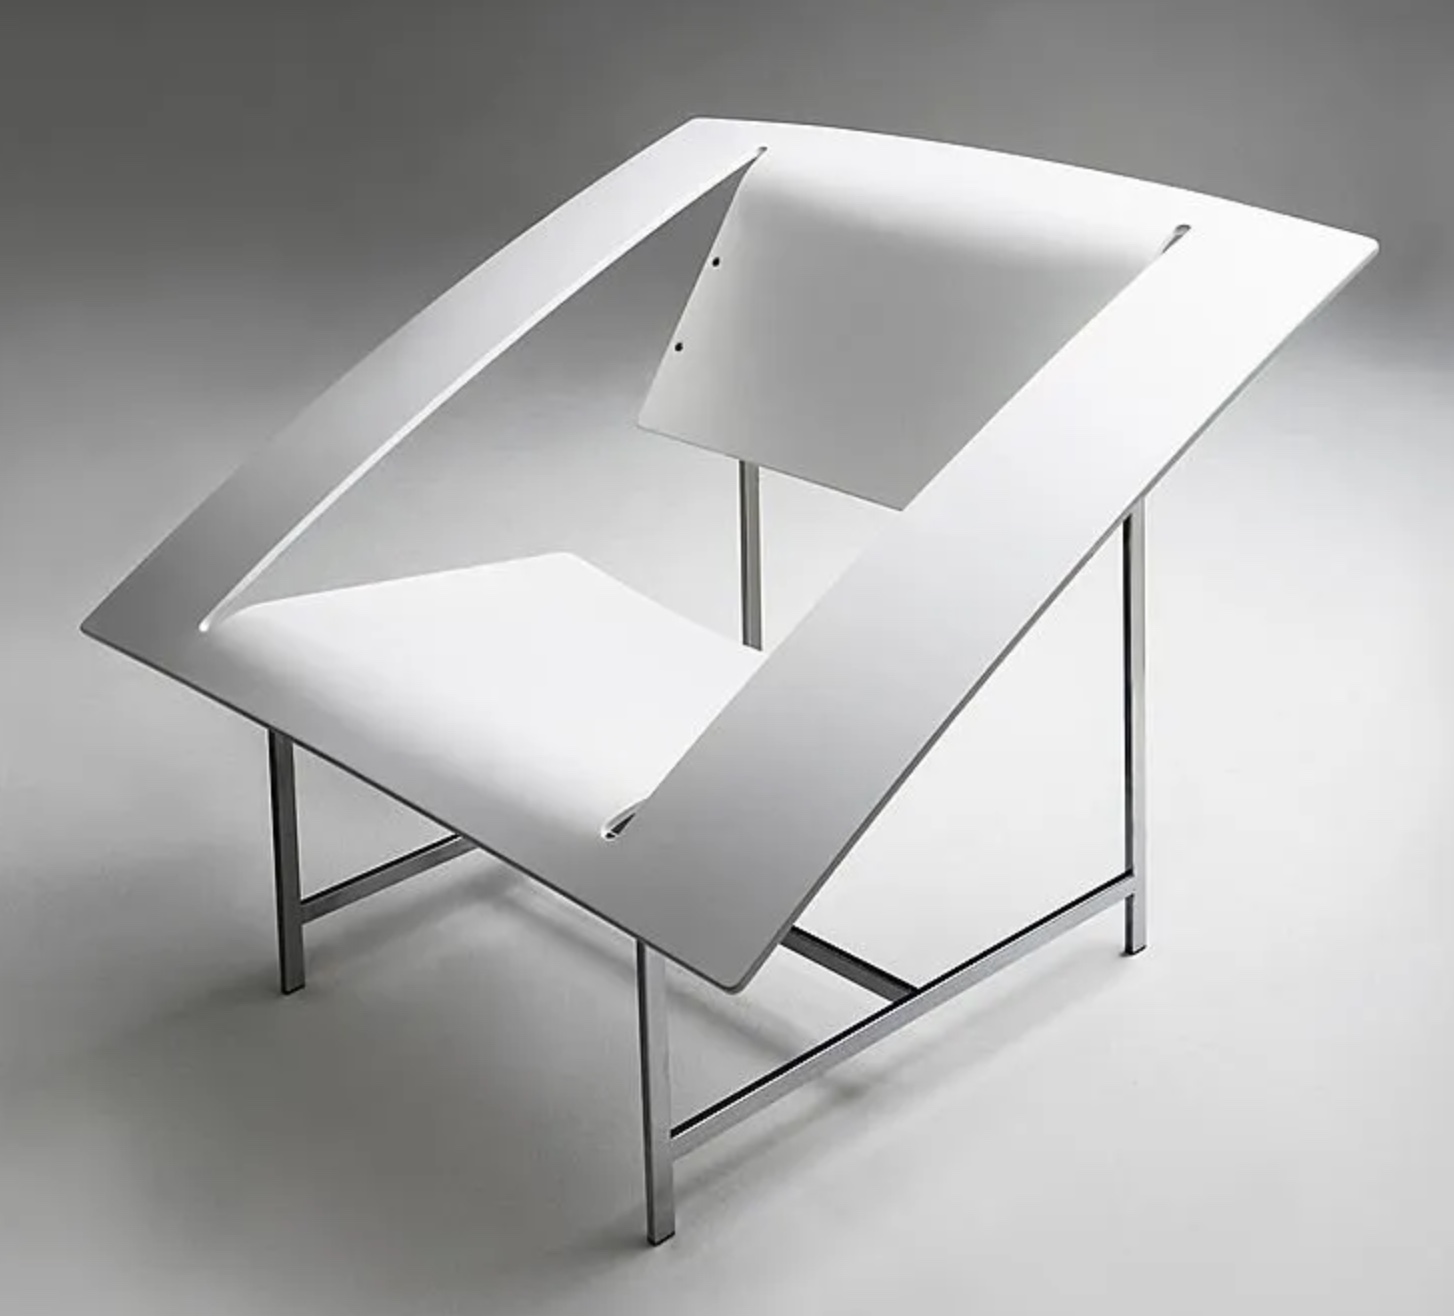 Silence and Sensibility in Mobel’s Kolo Chair